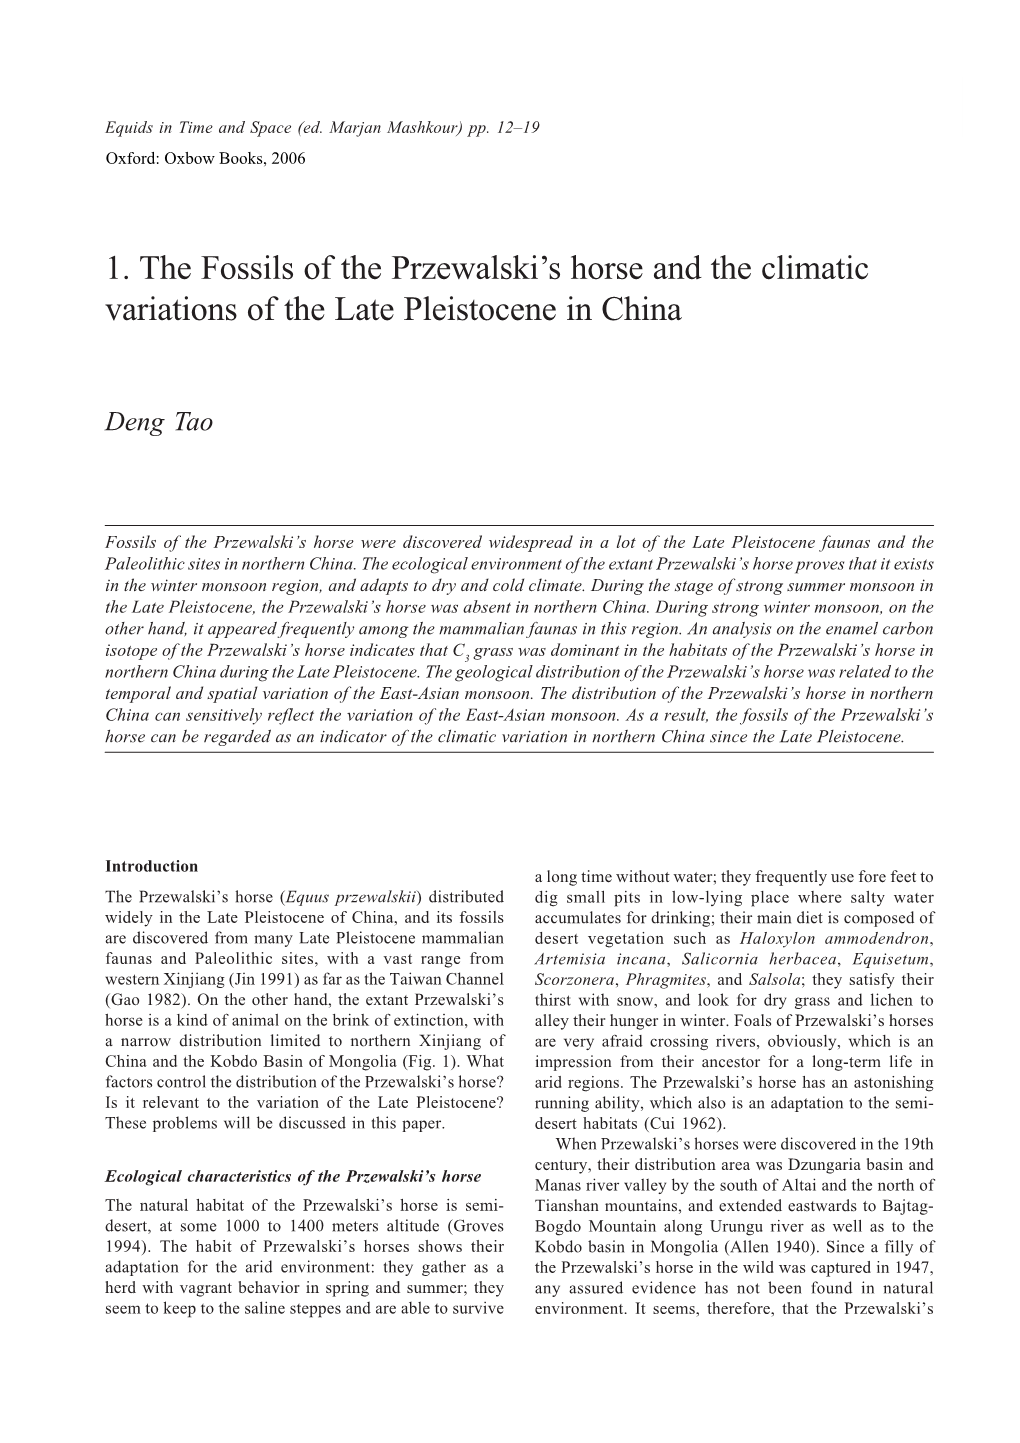 1. the Fossils of the Przewalski's Horse and the Climatic Variations Of